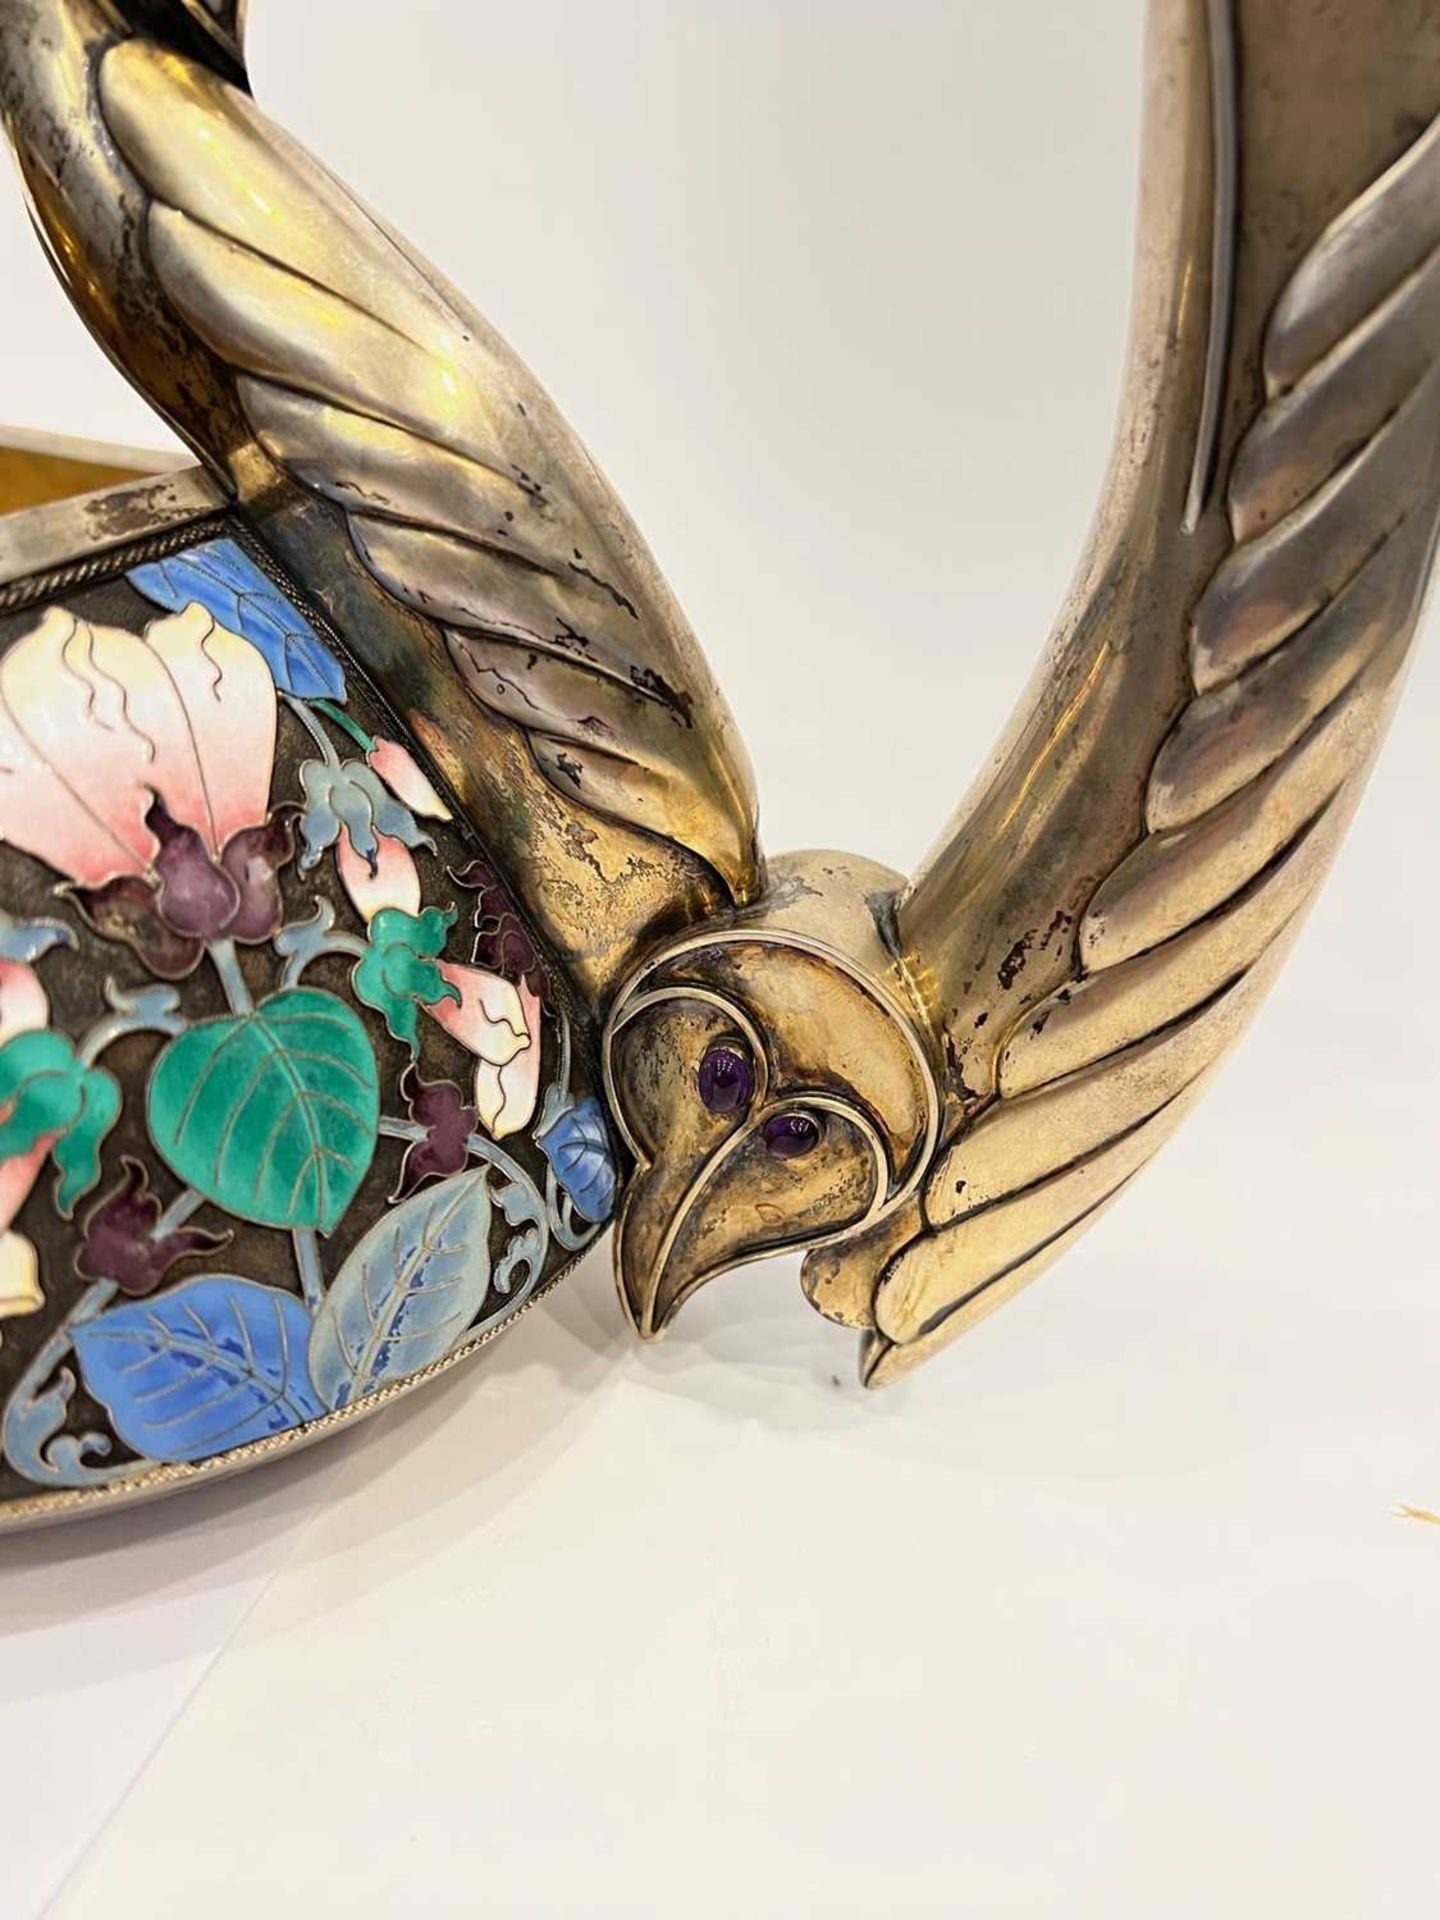 A MASSIVE EARLY 20TH CENTURY RUSSIAN SILVER AND ENAMEL KOVSH IN THE FORM OF A SWAN - Image 7 of 28